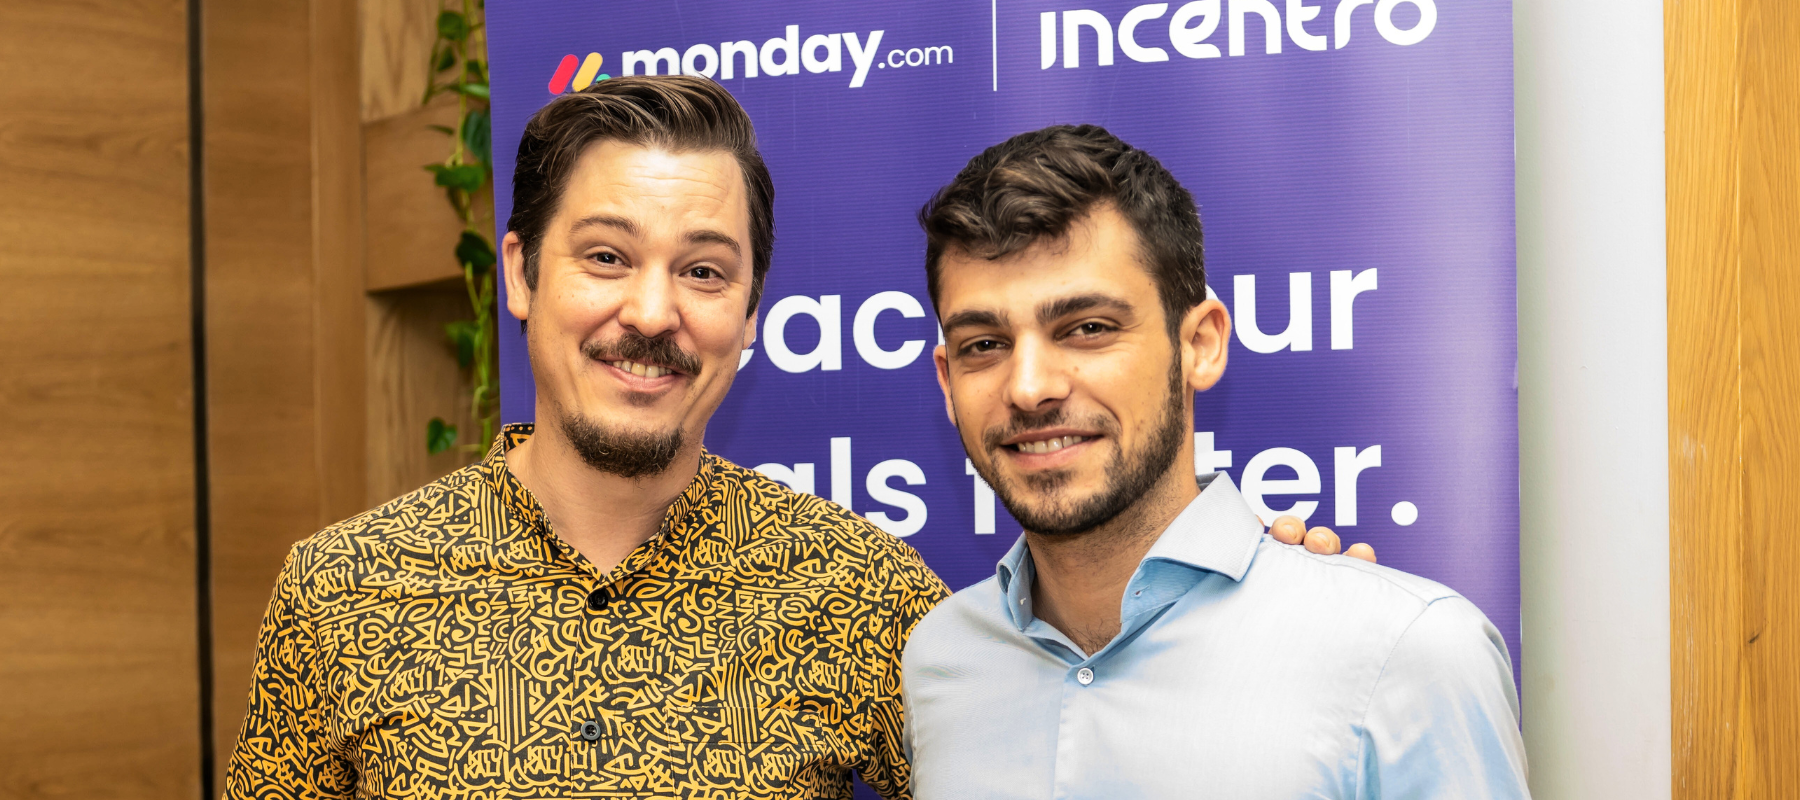 [Incentro Event] Introducing monday.com CRM in South Africa